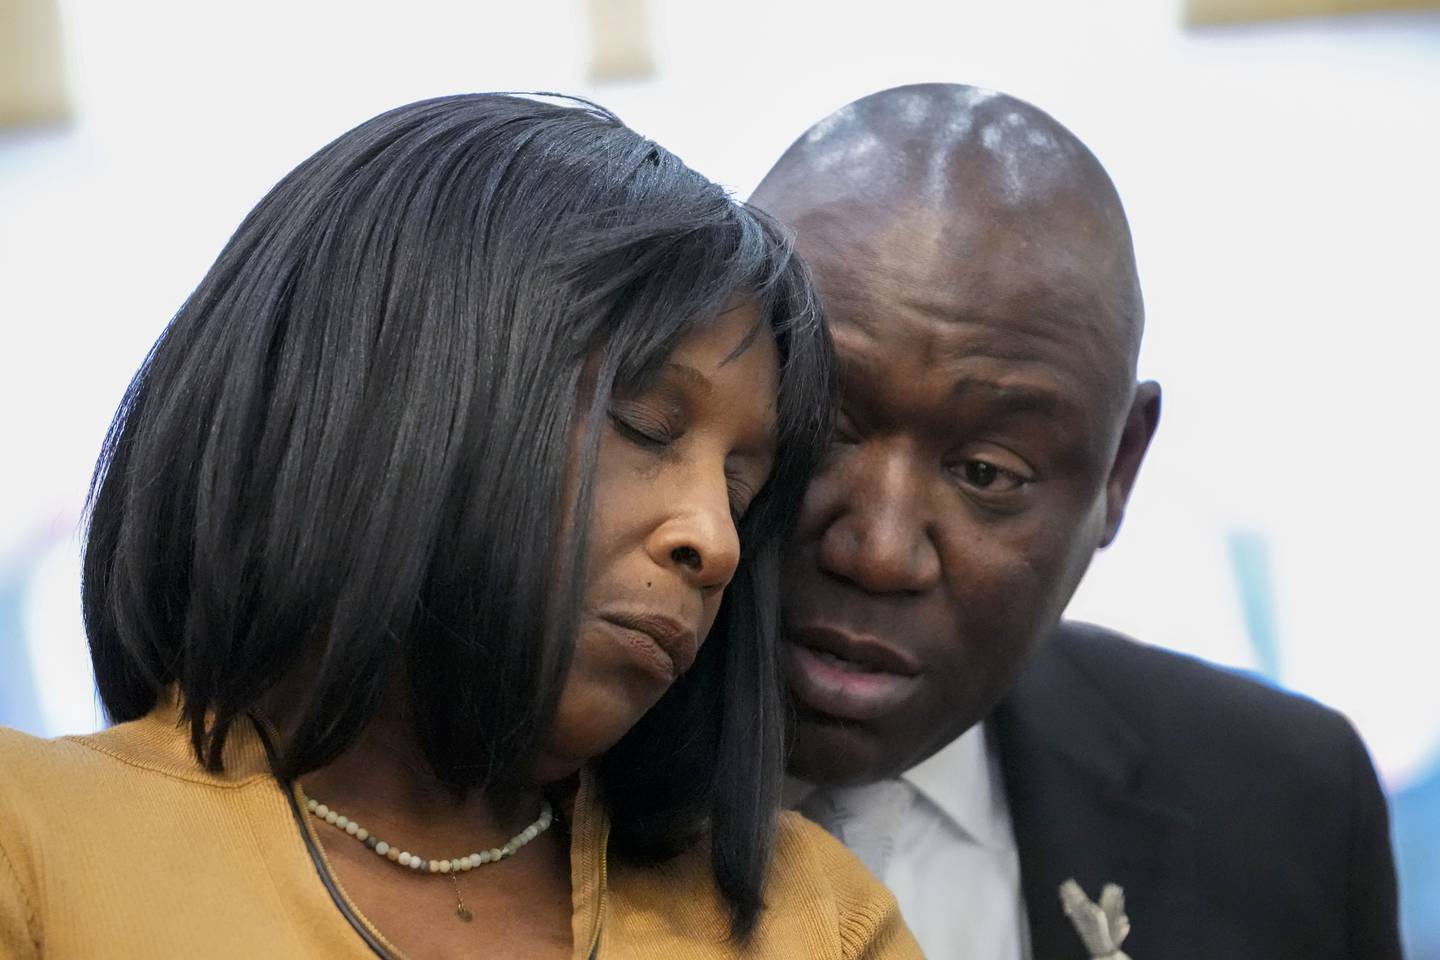 Civil rights Attorney Ben Crump speaks to RowVaughn Wells, mother of Tyre Nichols, who died after being beaten by Memphis police officers, at a news conference with in Memphis, Tenn., Friday, Jan. 27, 2023.